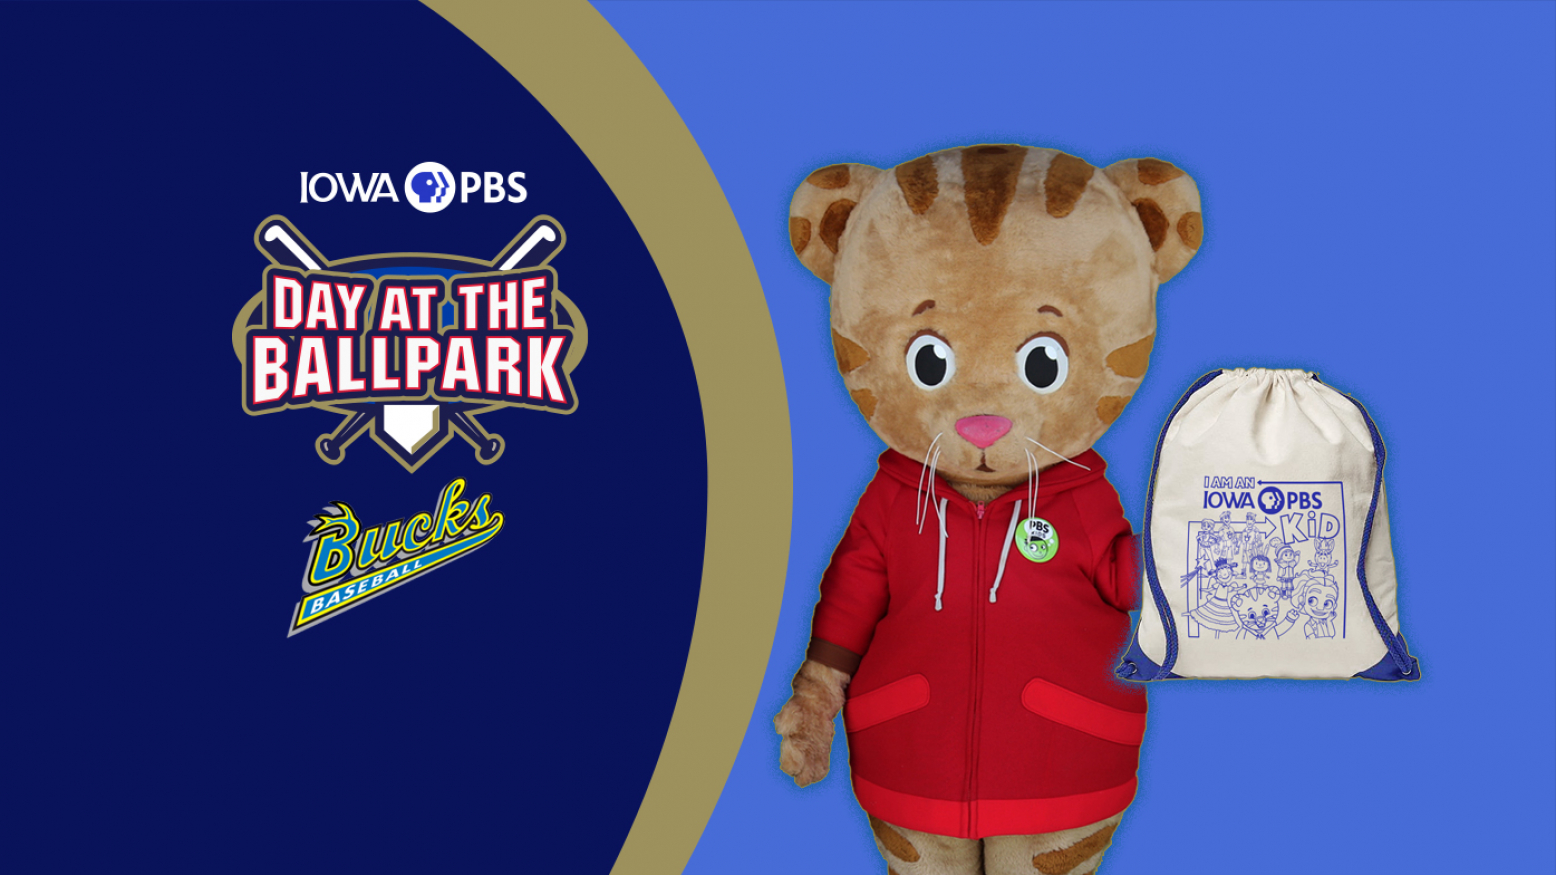 Daniel Tiger holding a bag with text on screen "Day at the Ballpark"